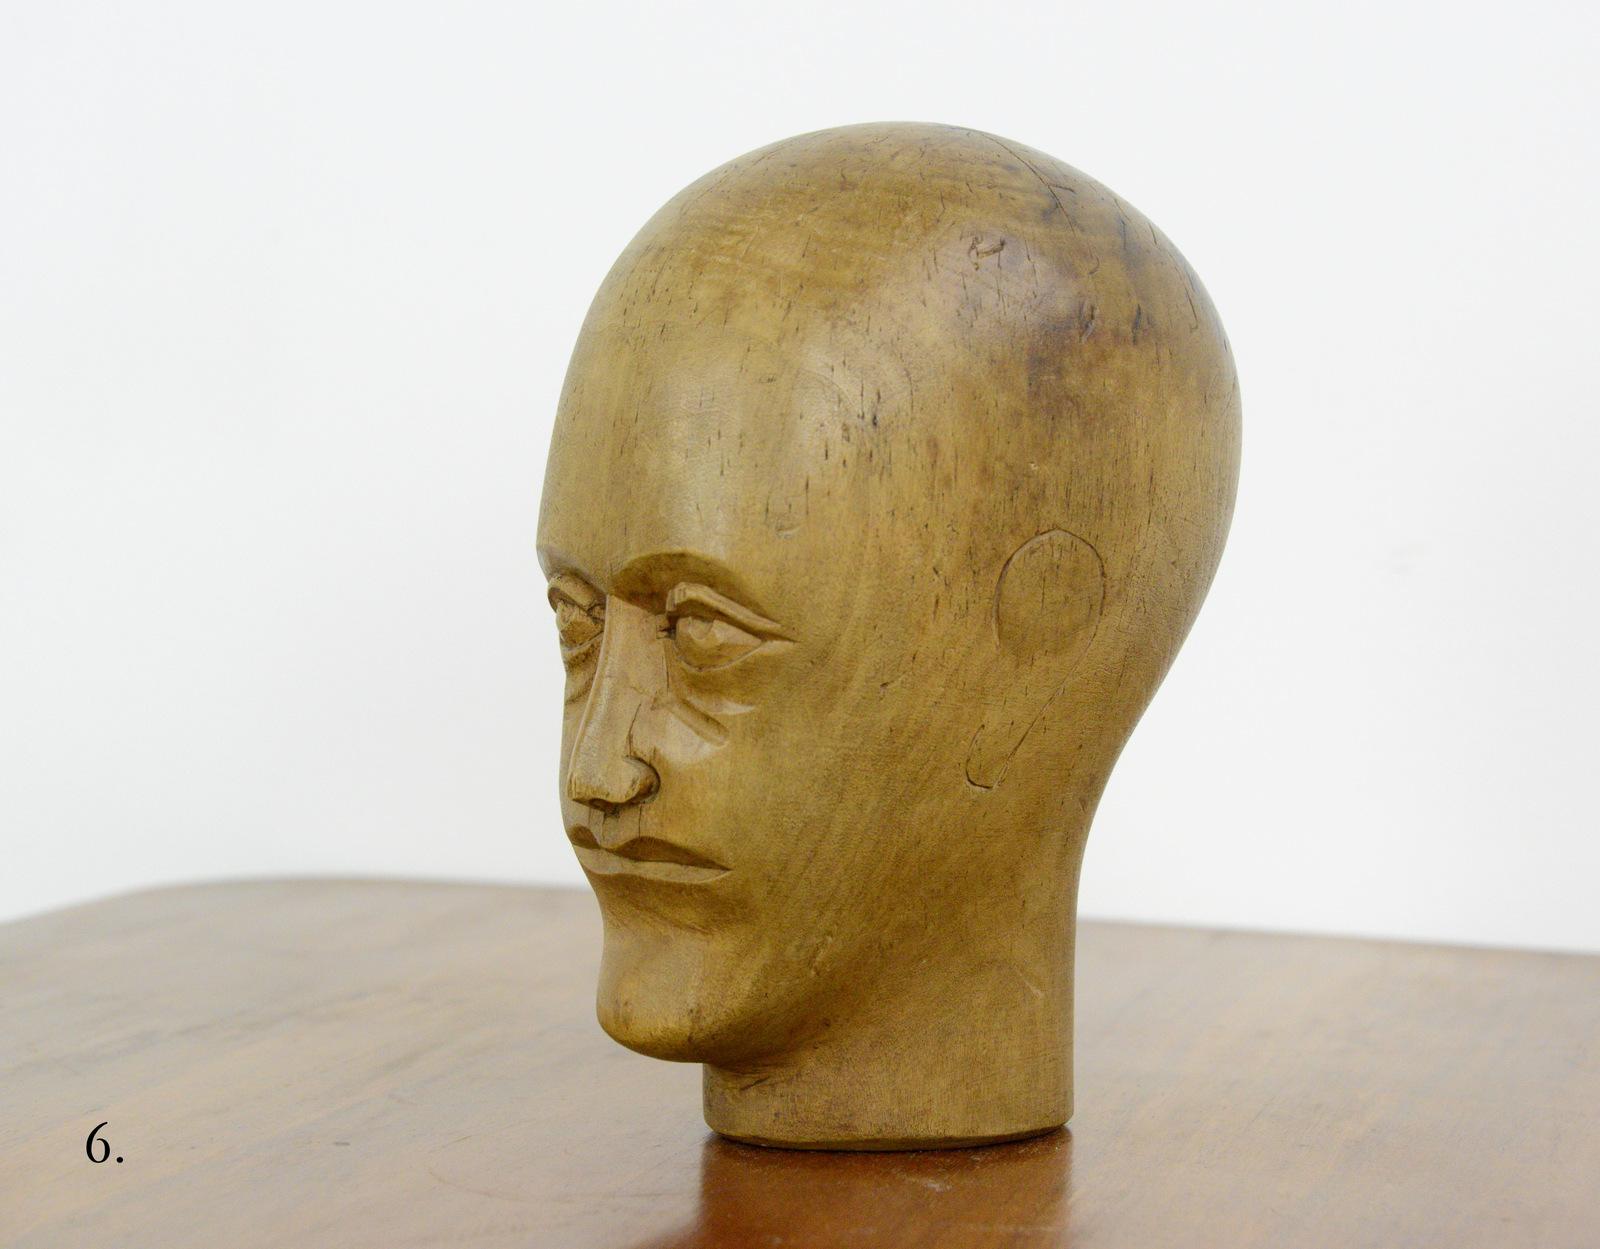 German carved wooden milliners head, circa 1910

- Hand carved from sycamore
- Used in the displaying and making of hats
- German, 1910
- Measures: 25 cm tall x 15 cm wide x 18 cm deep

Condition report:

Signs of its previous in the form